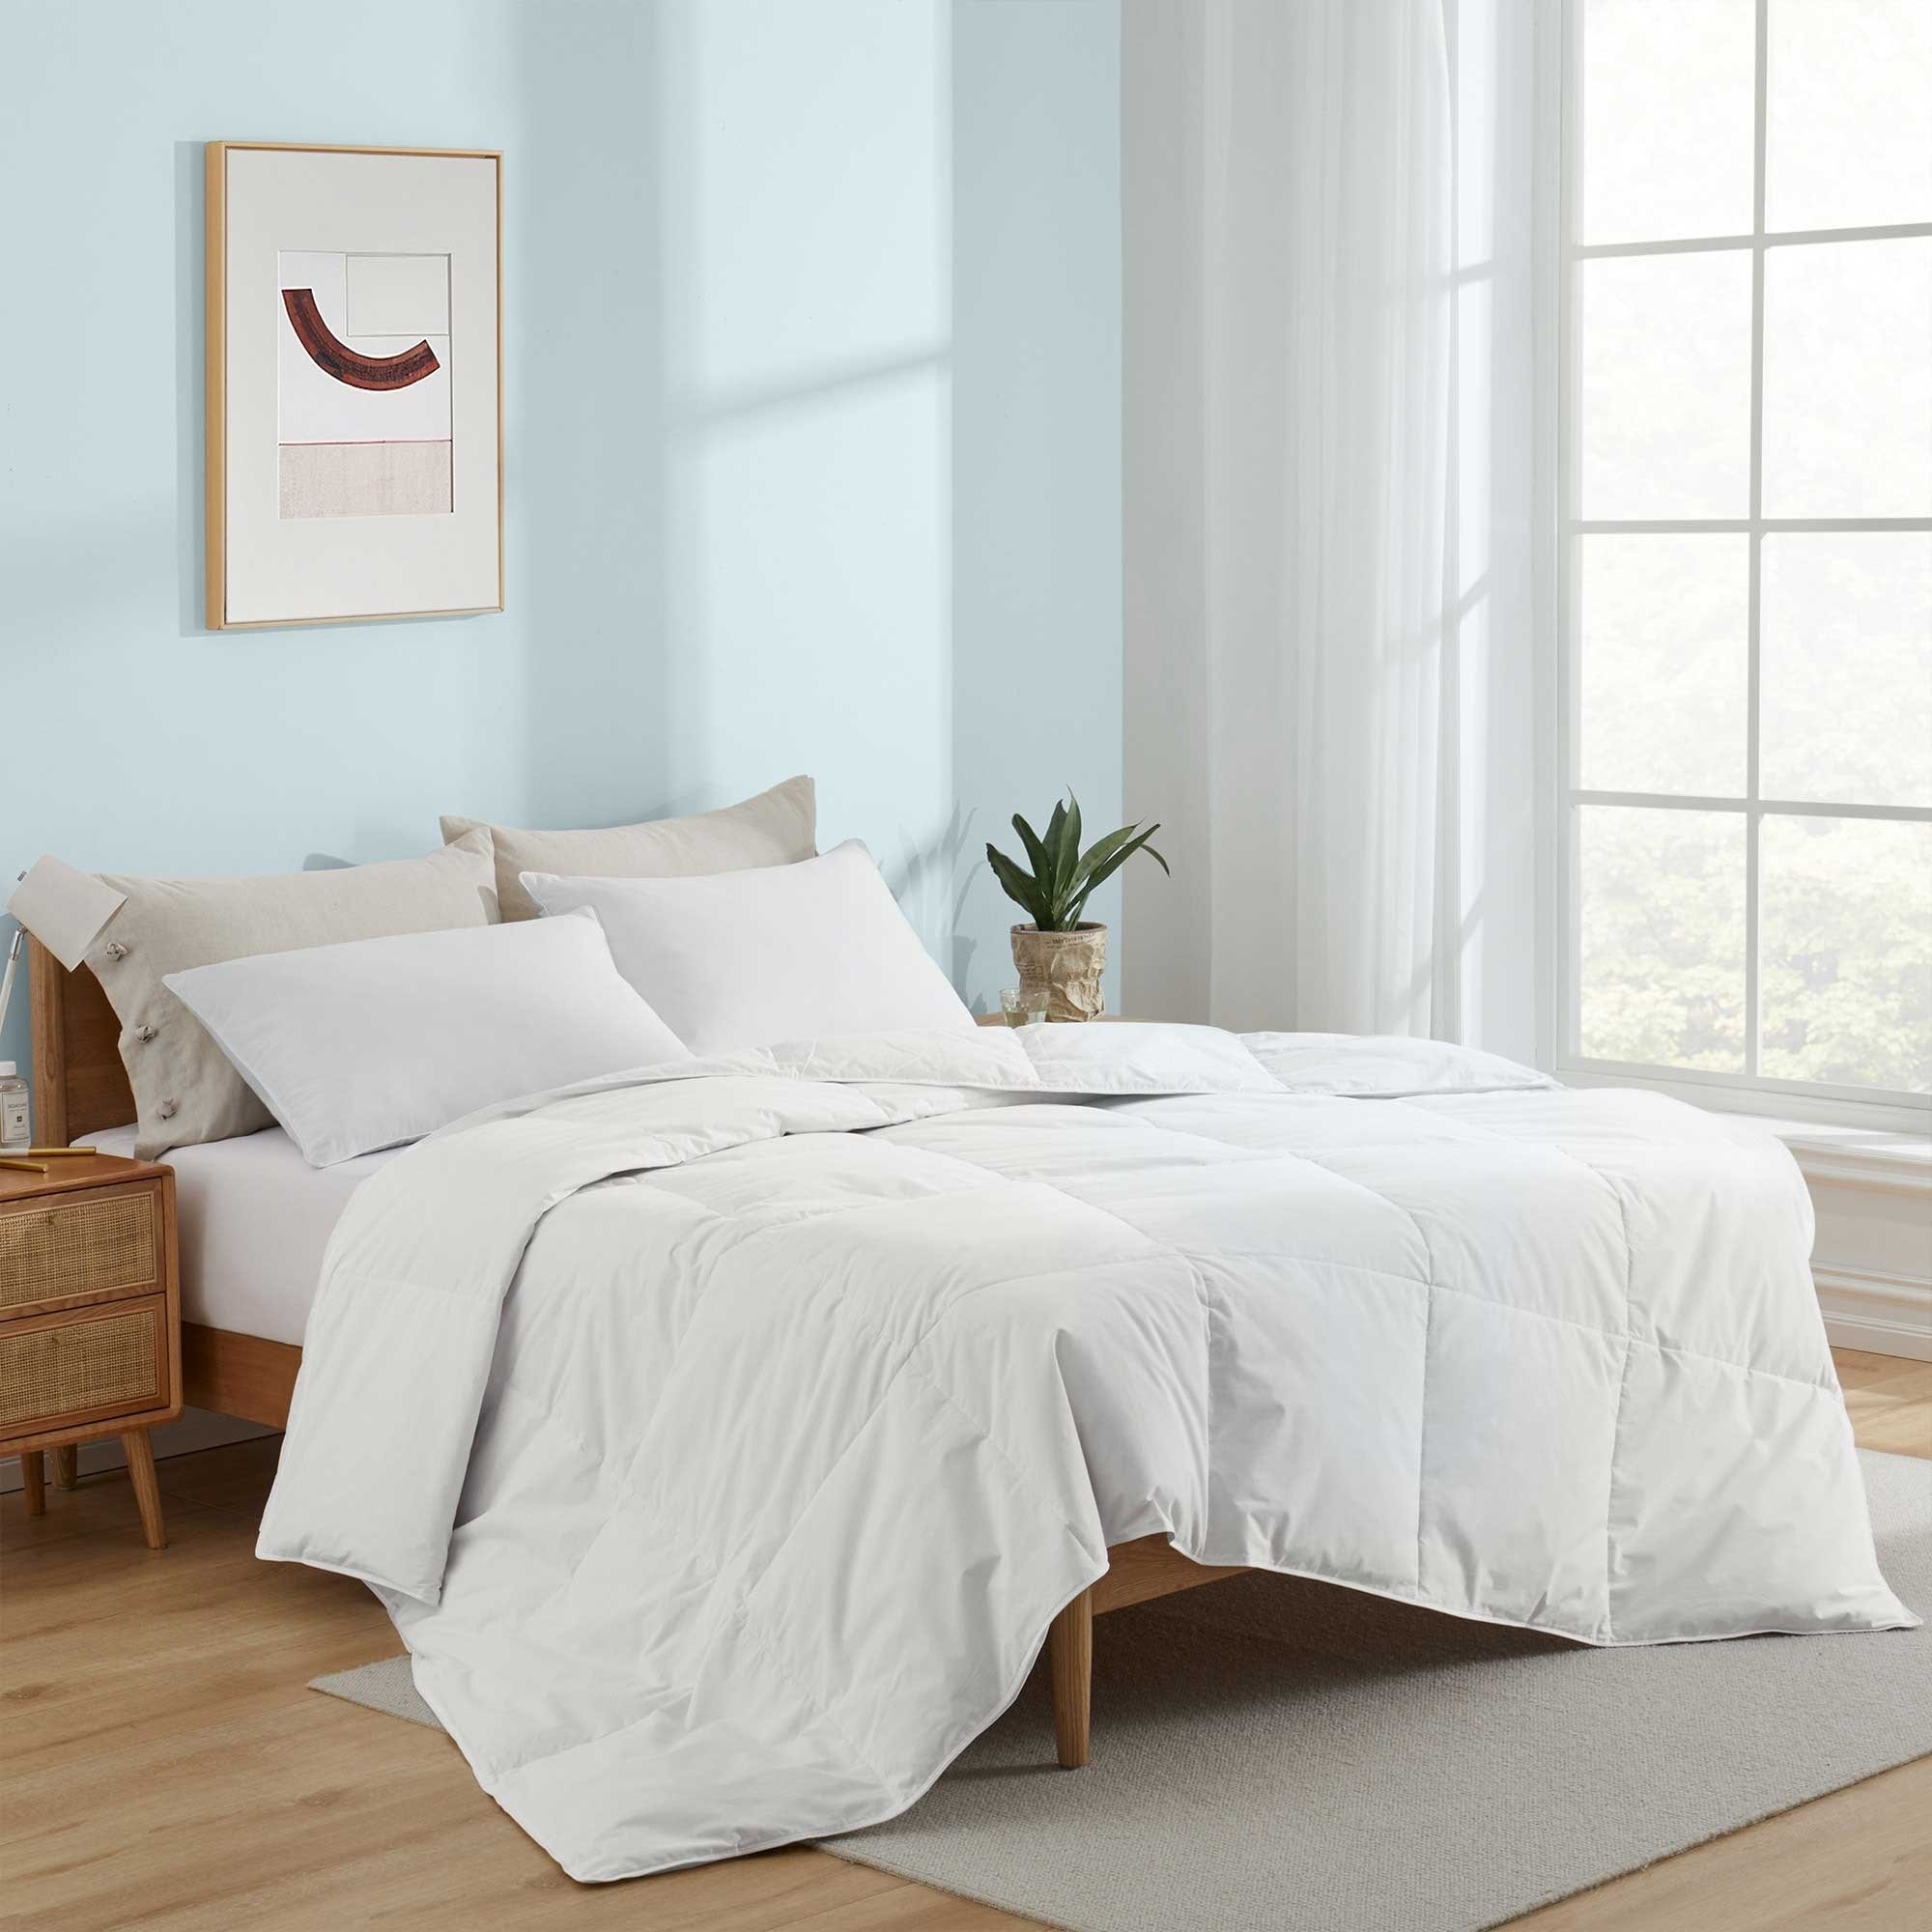 Lightweight White Goose Down And UltraFeather Comforter - White, King